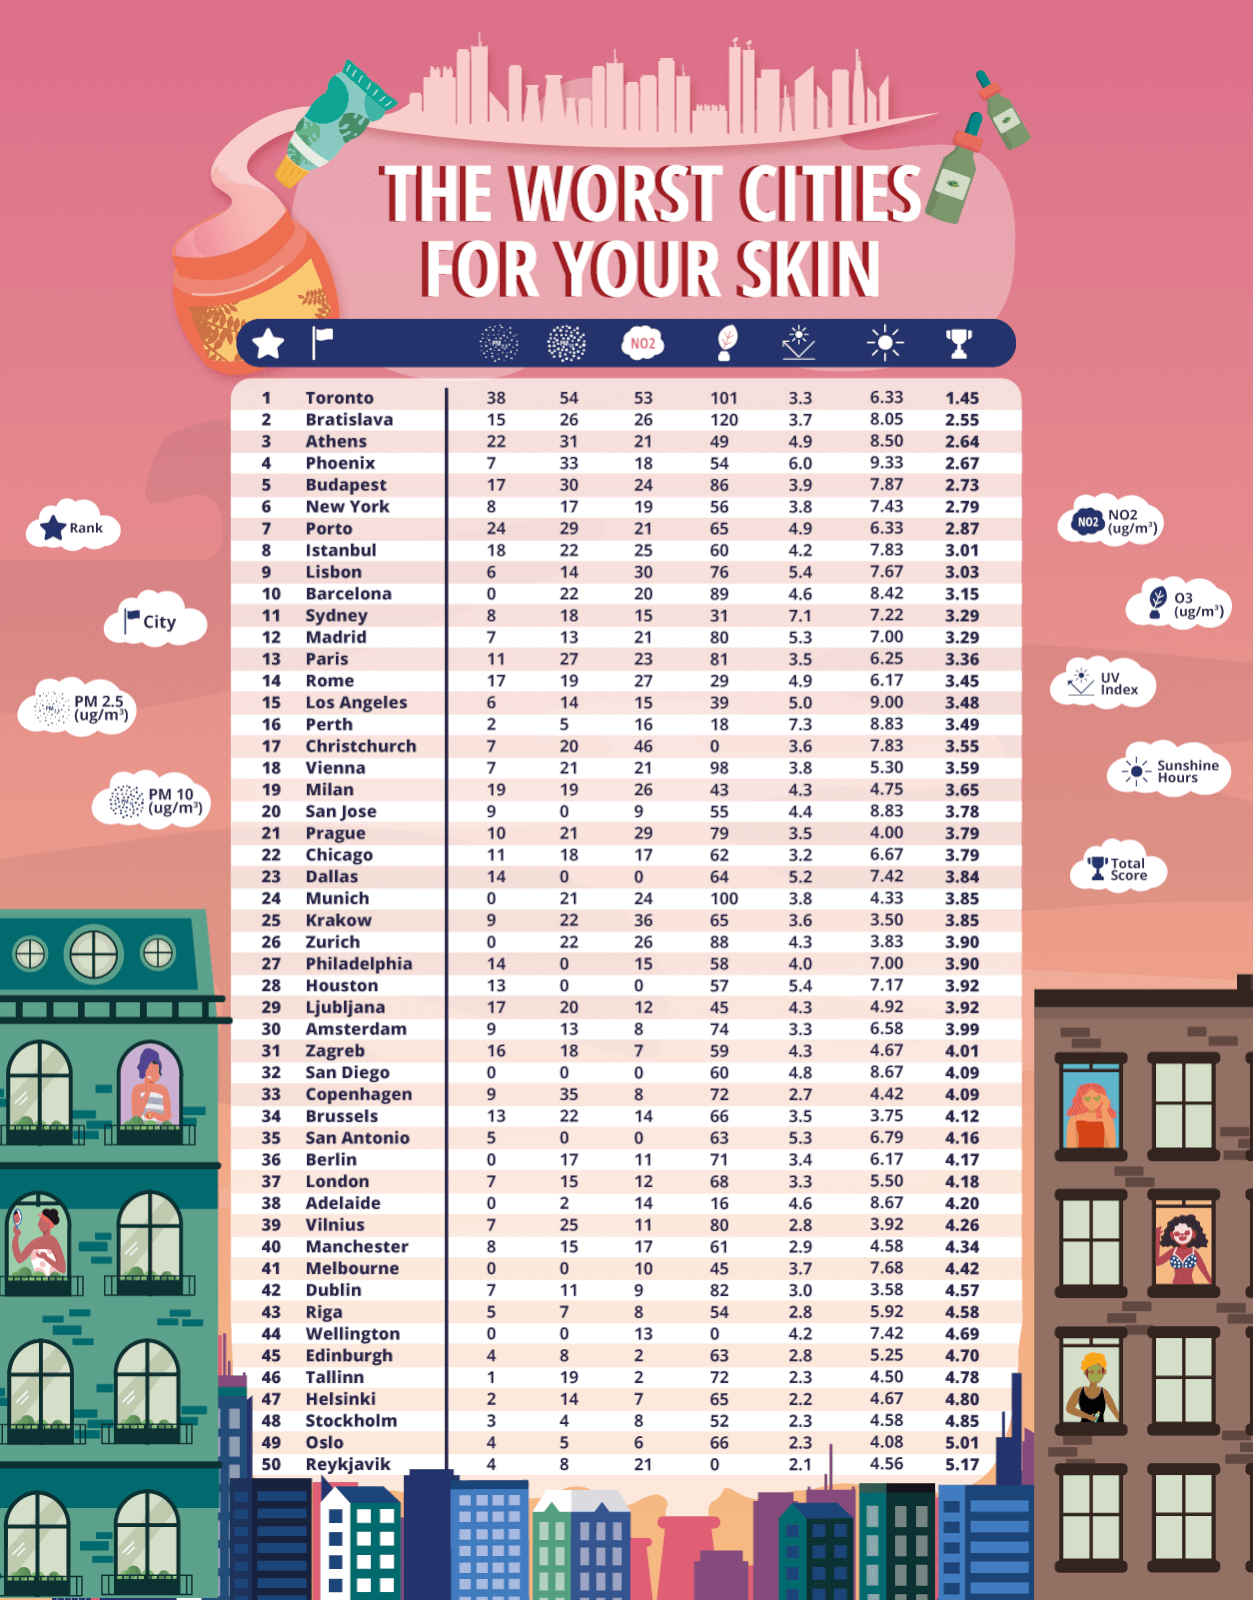 Table showing the worst cities for your skin across the world.